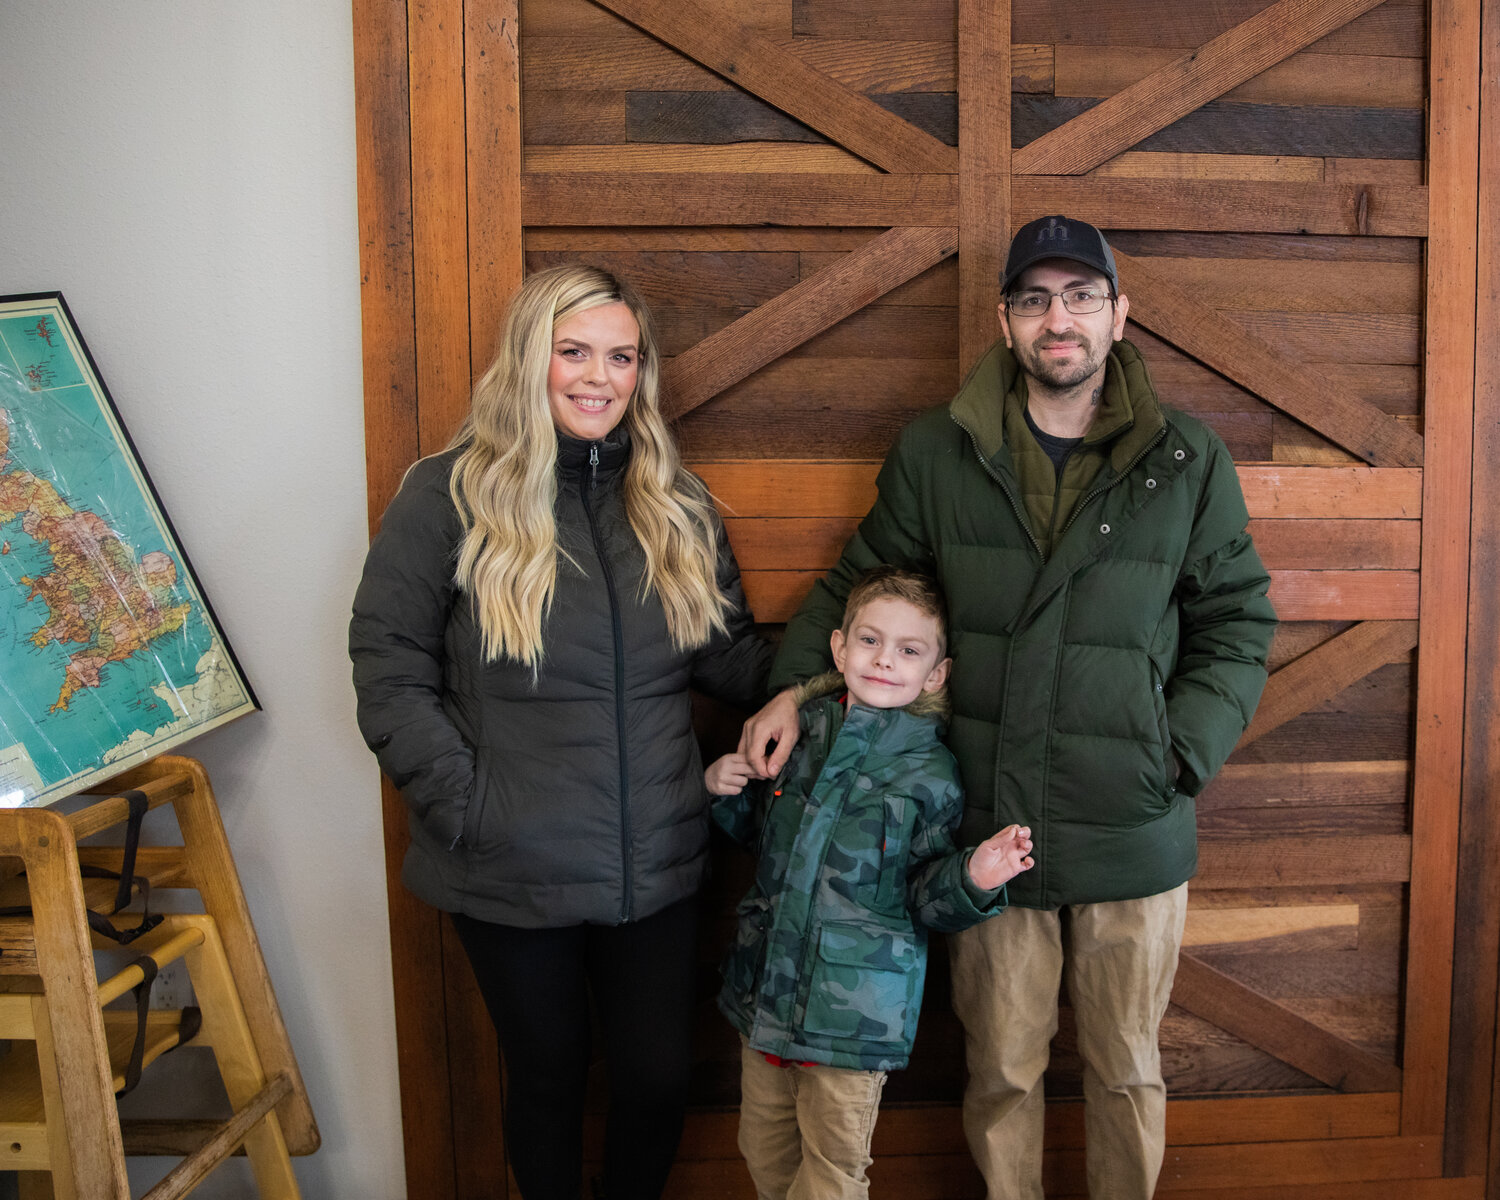 Lori and Mike West pose for a photo alongside son Morgan at the location of British Bites in Centralia as the building was remodeled last October.